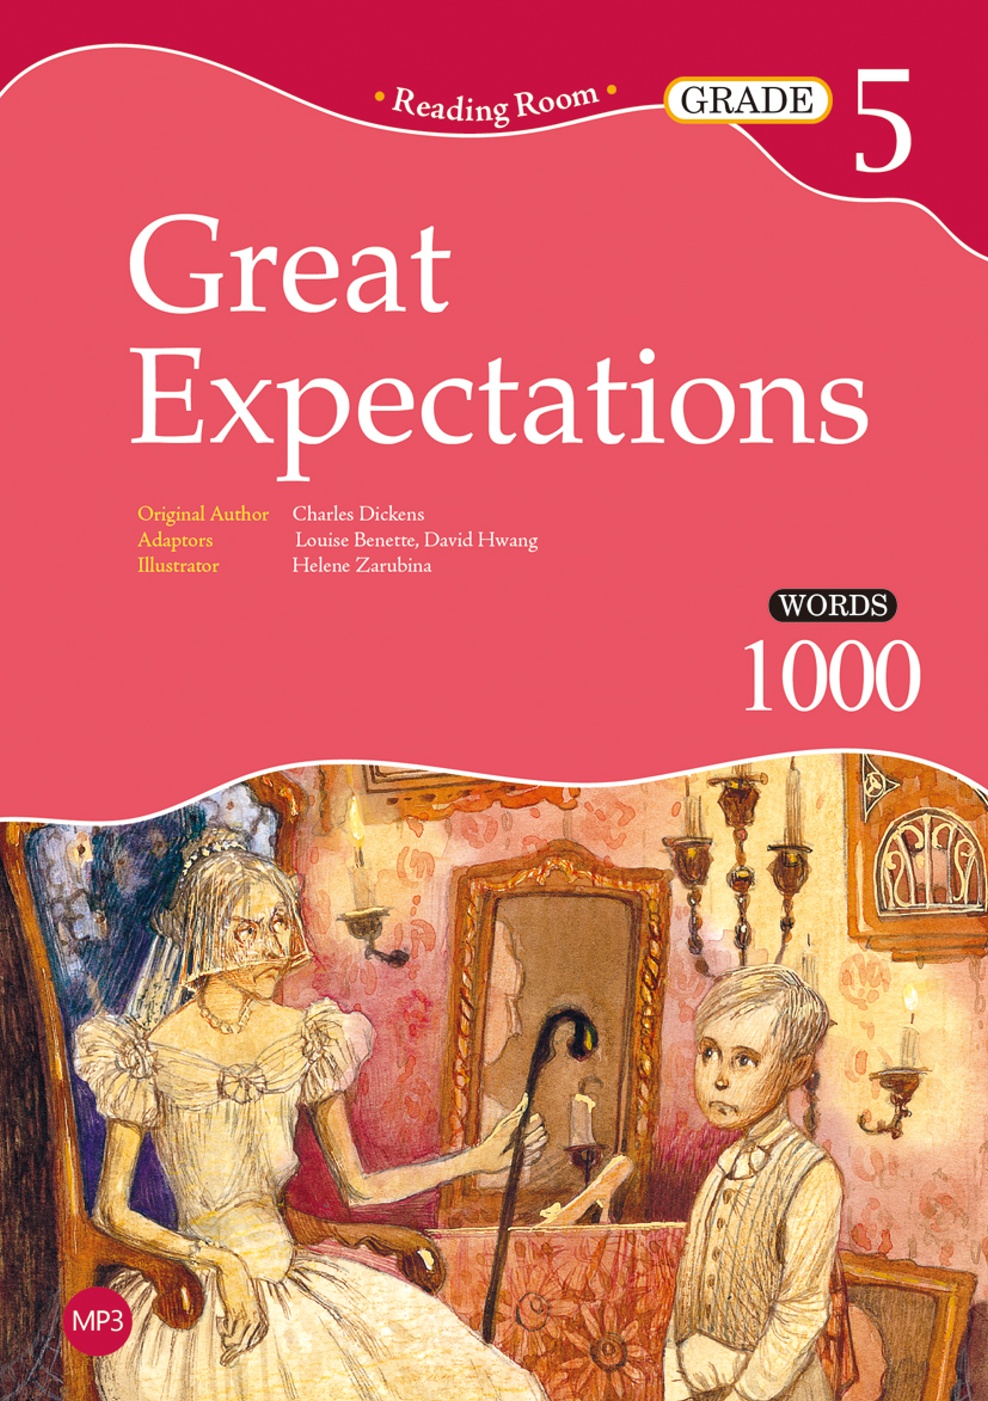 Great Expectations【Grade 5】(2nd Ed.)（25K經典文學改寫讀本+1MP3）